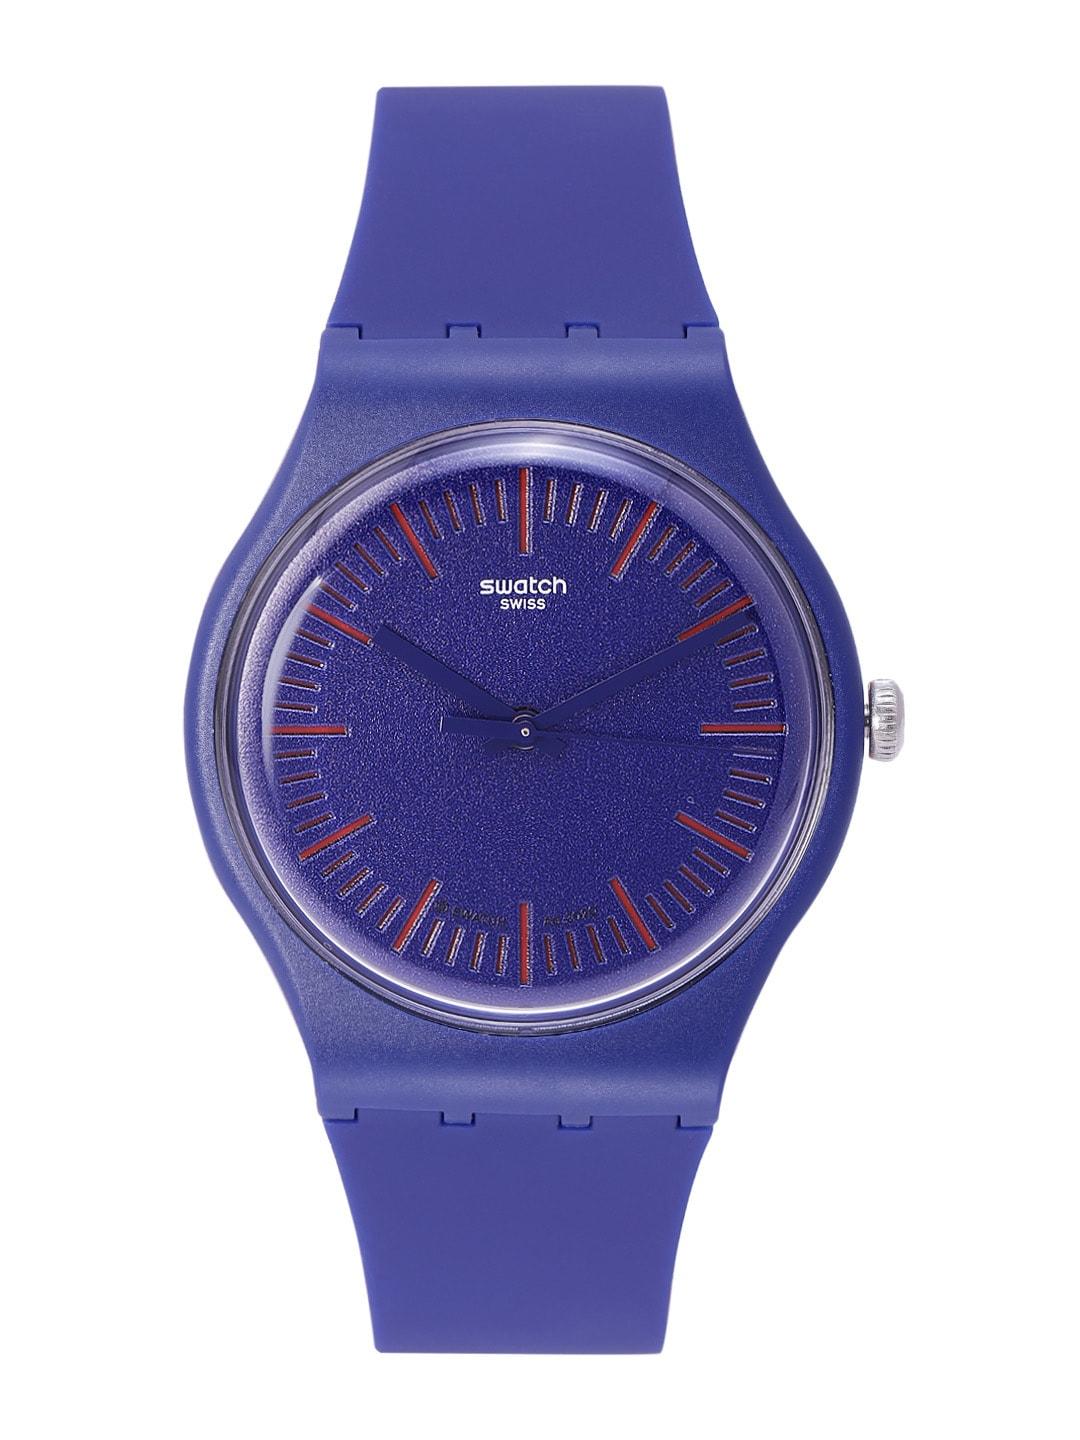 Swatch Unisex Blue Water Resistant Analogue Watch SUON146